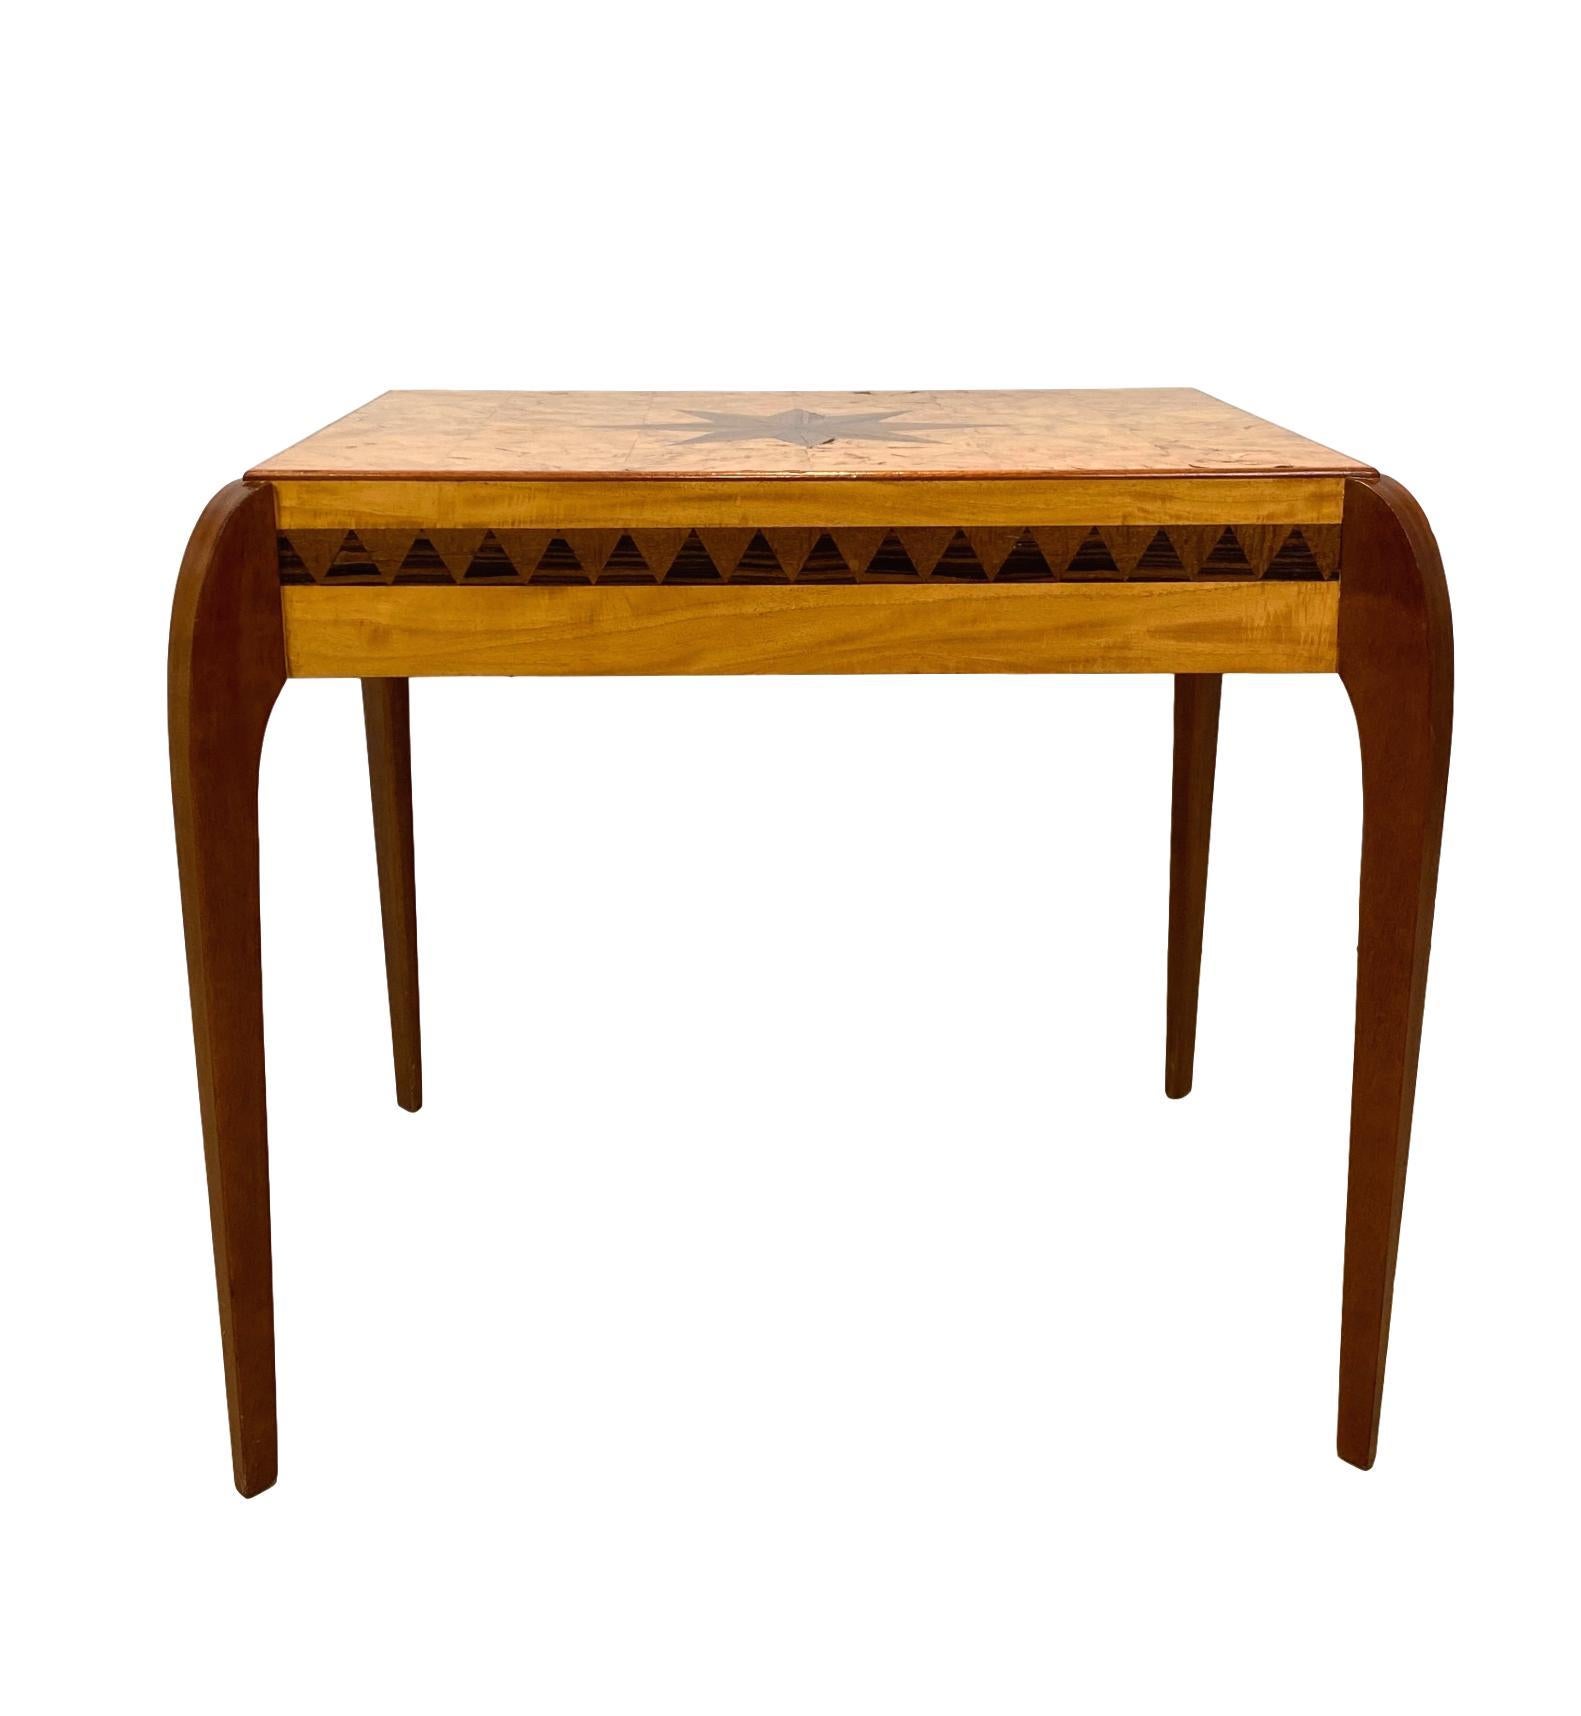 English Mid-Century Modern Inlaid Center Table in Exotic Woods with Compass Star, 1996